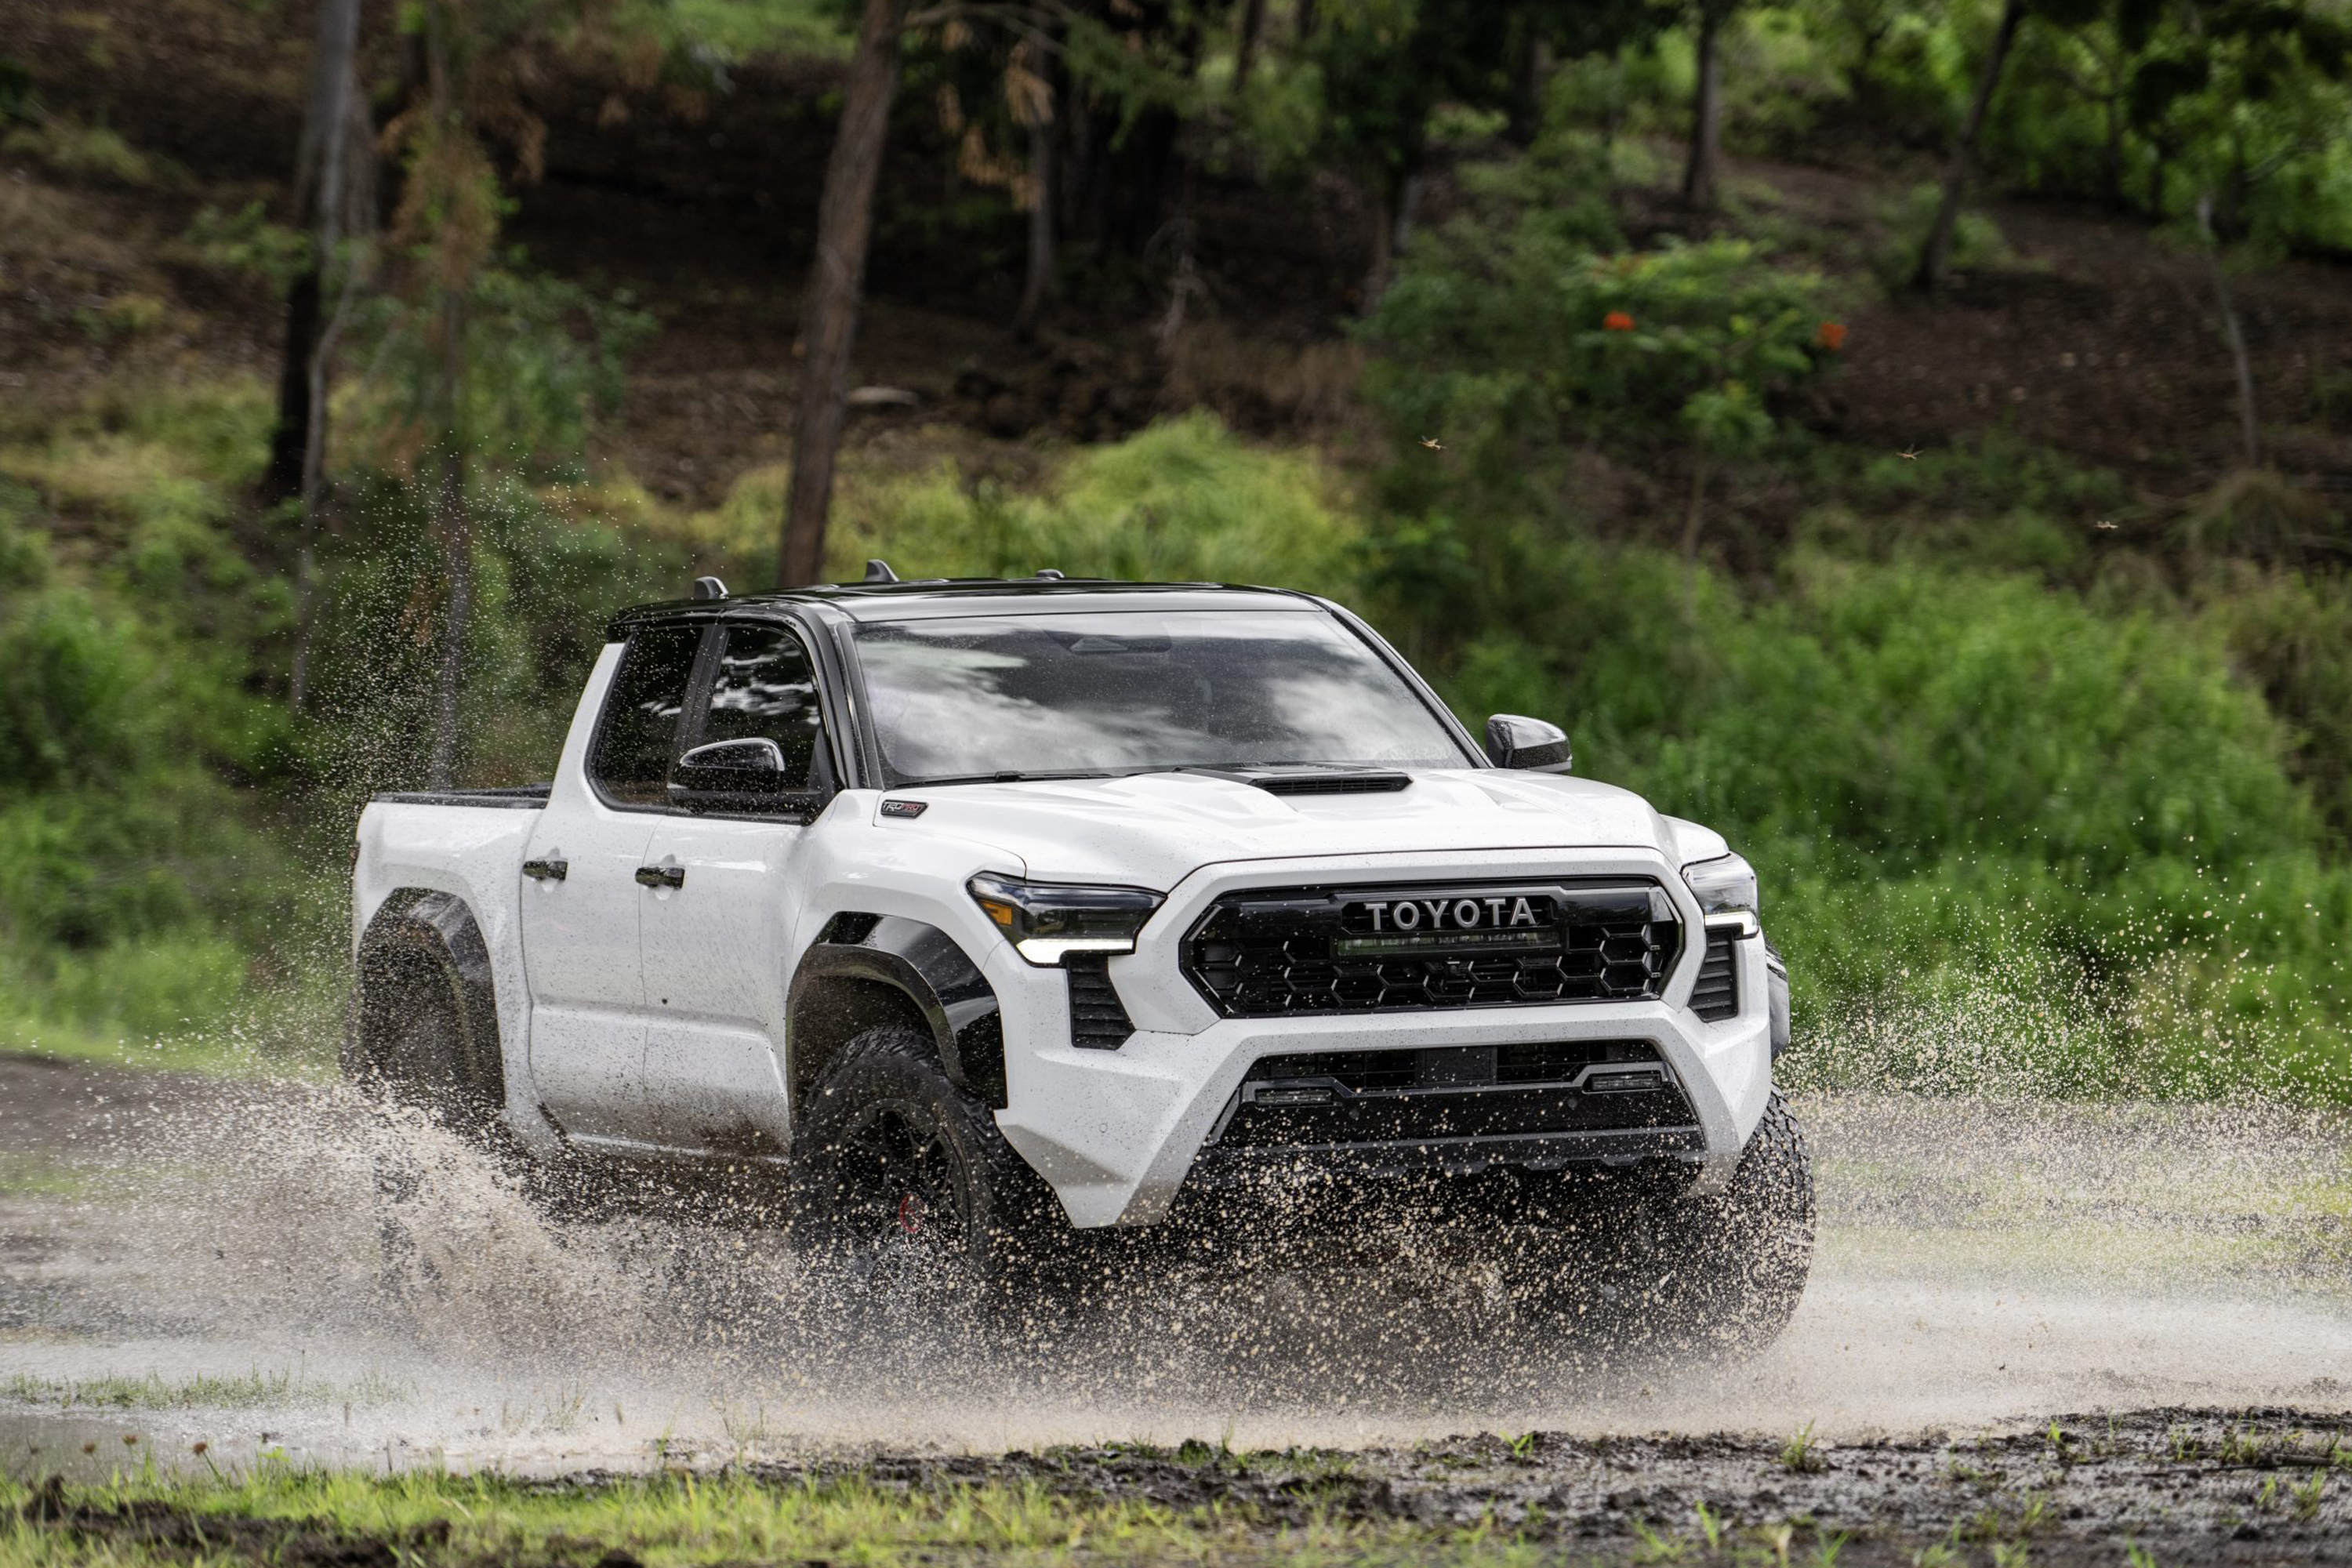 Toyota flexes on Ford with new vehicles designed for off-roading